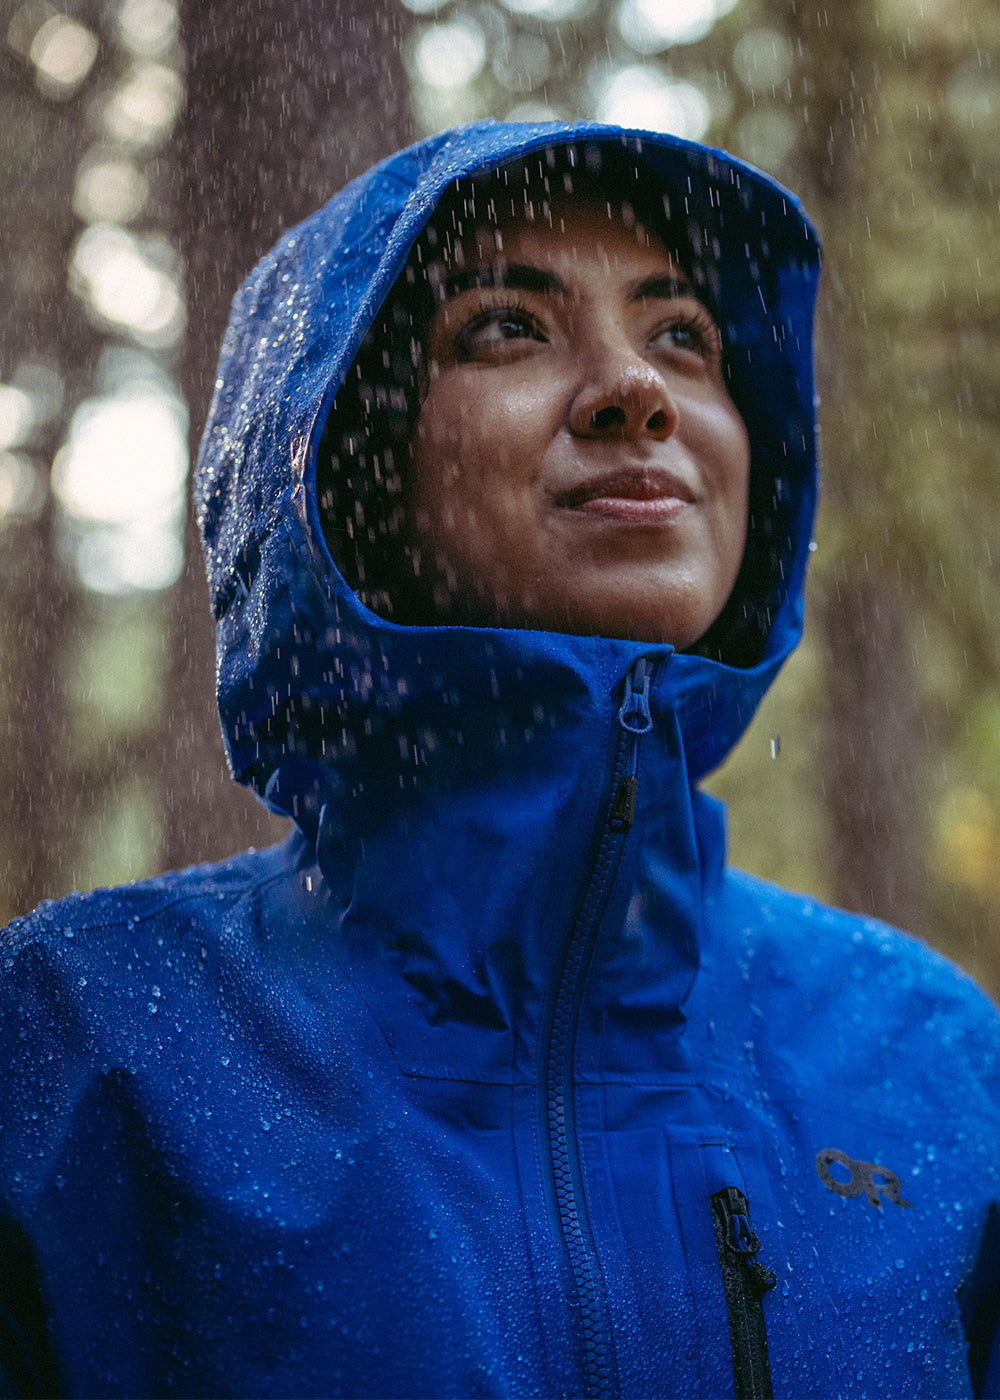 The Best 6 Running Rain Jackets of 2024 - Jackets for Running in